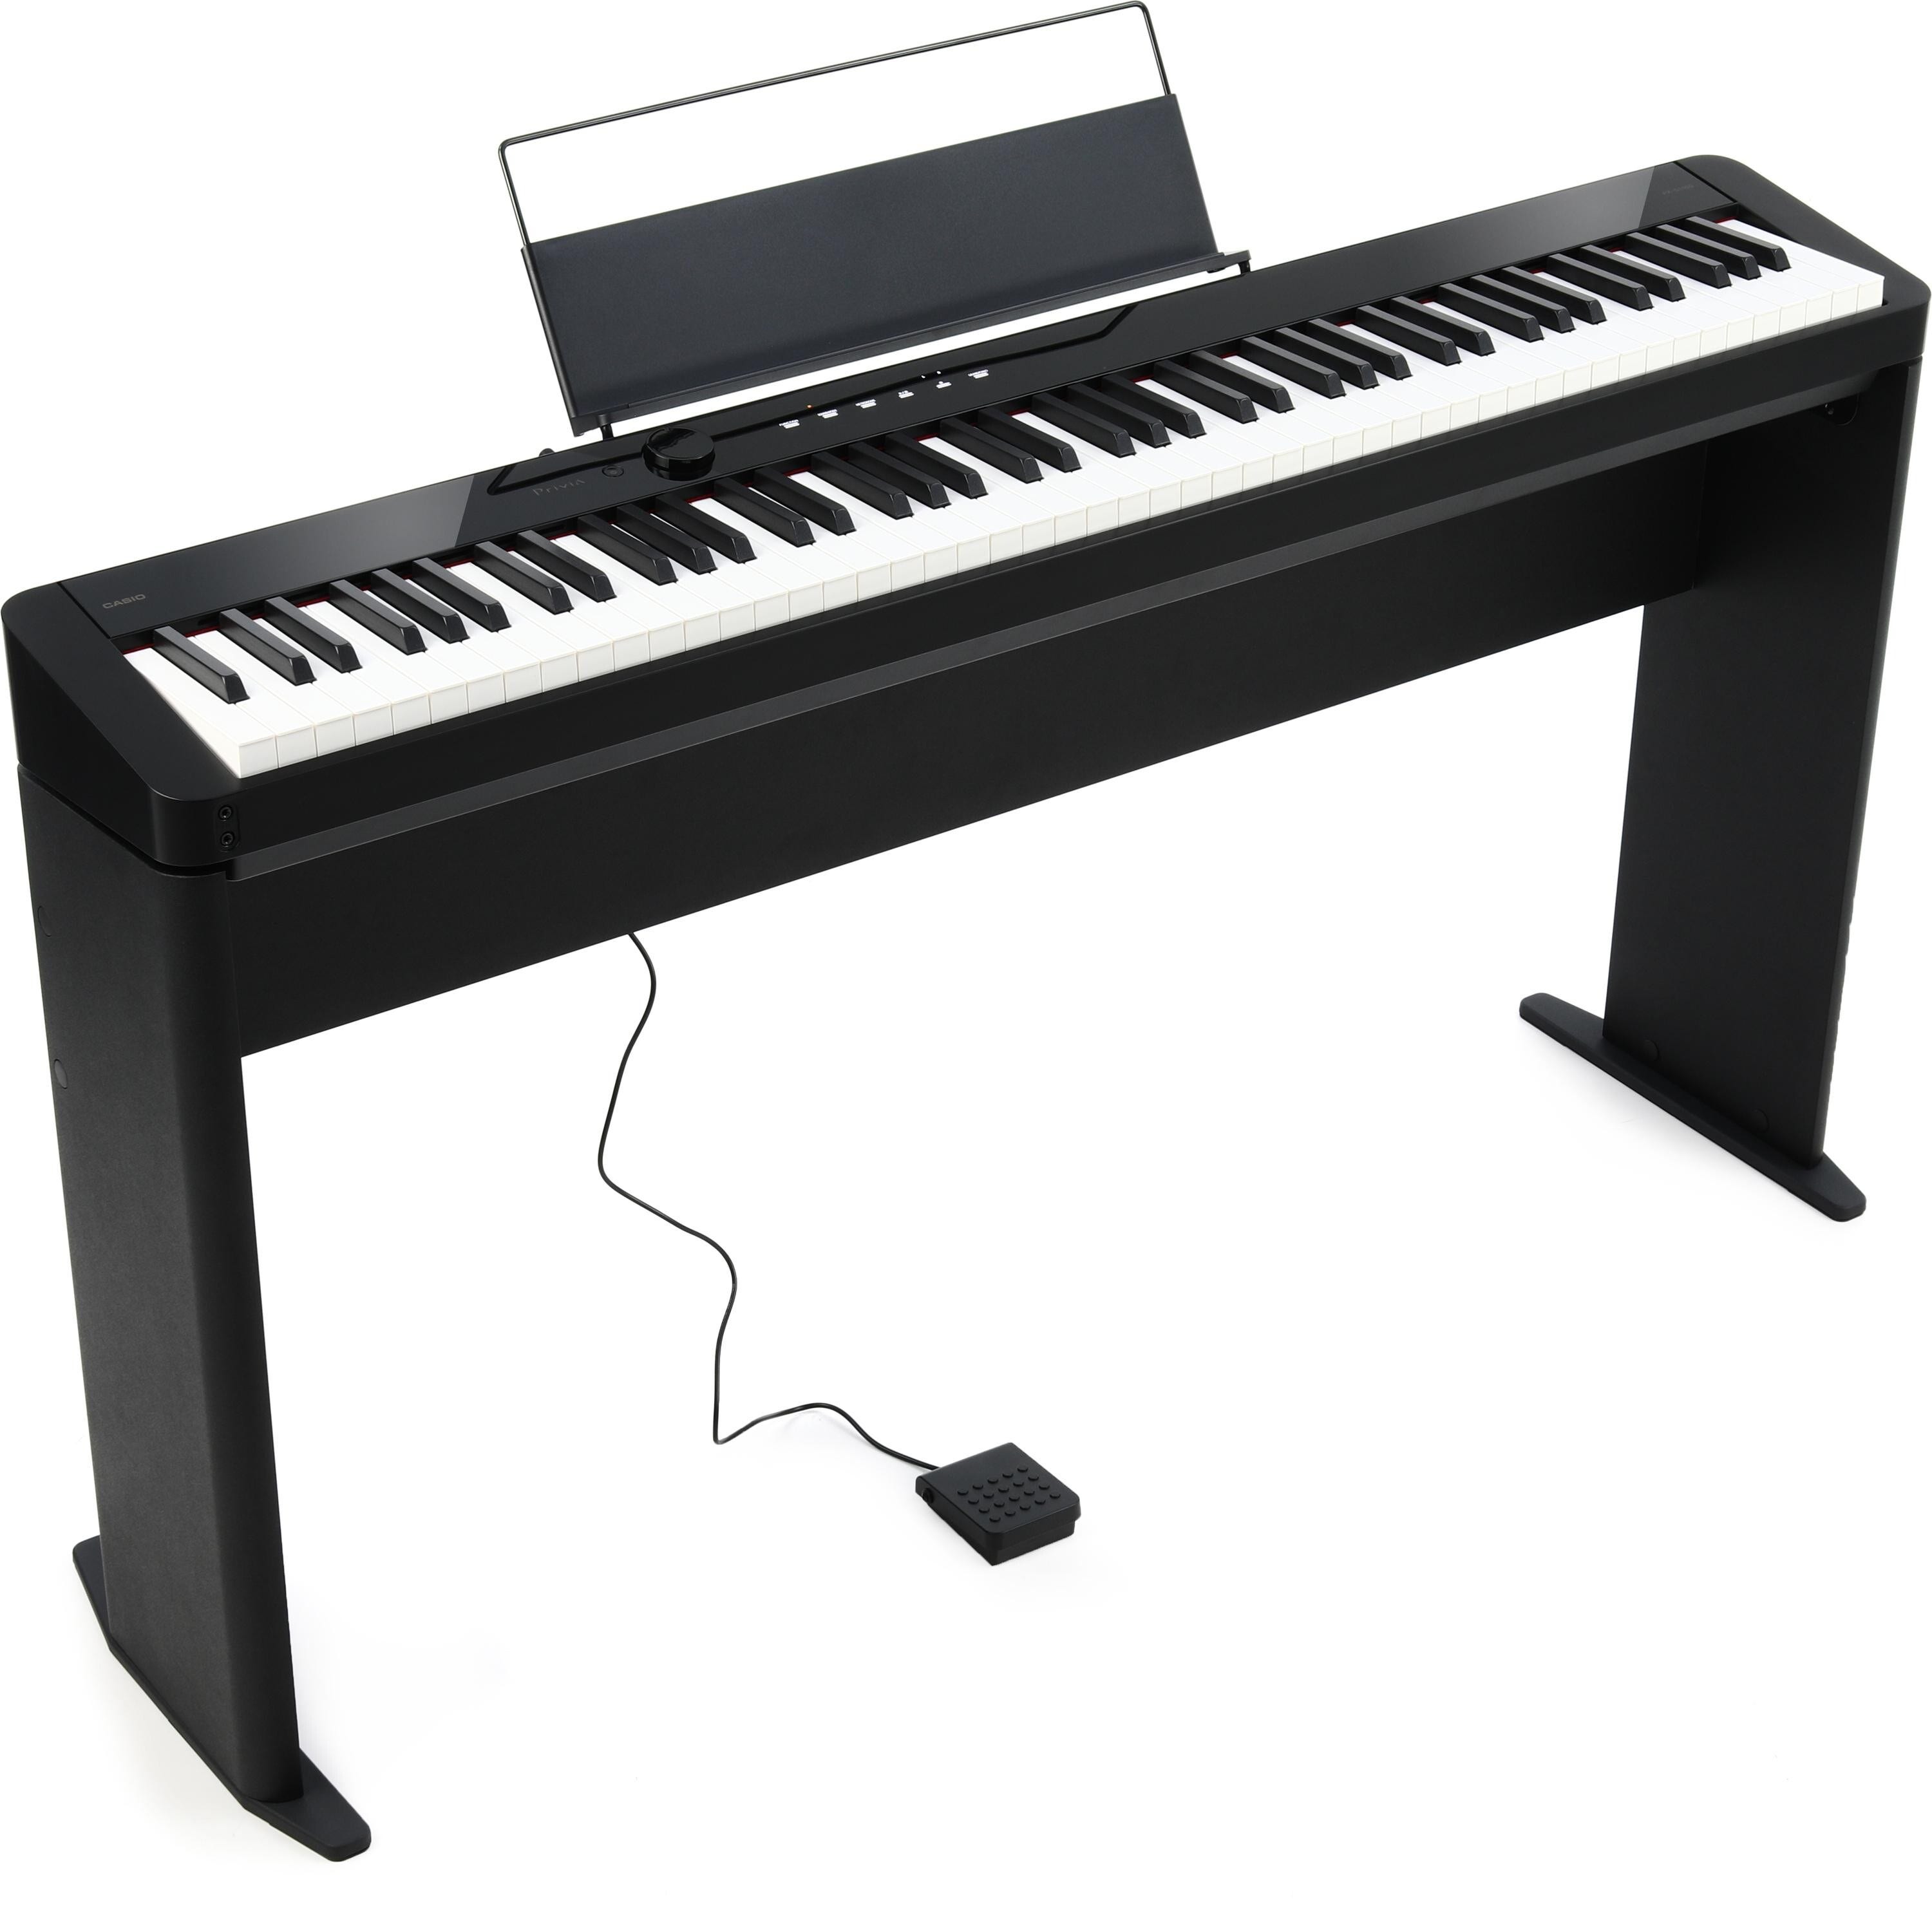 Casio Privia PX-S1100 Digital Piano Bundle with Adjustable Stand, Bench,  Sustain Pedal, Instructional Book, DVD, Online Piano Lessons, and Polishing